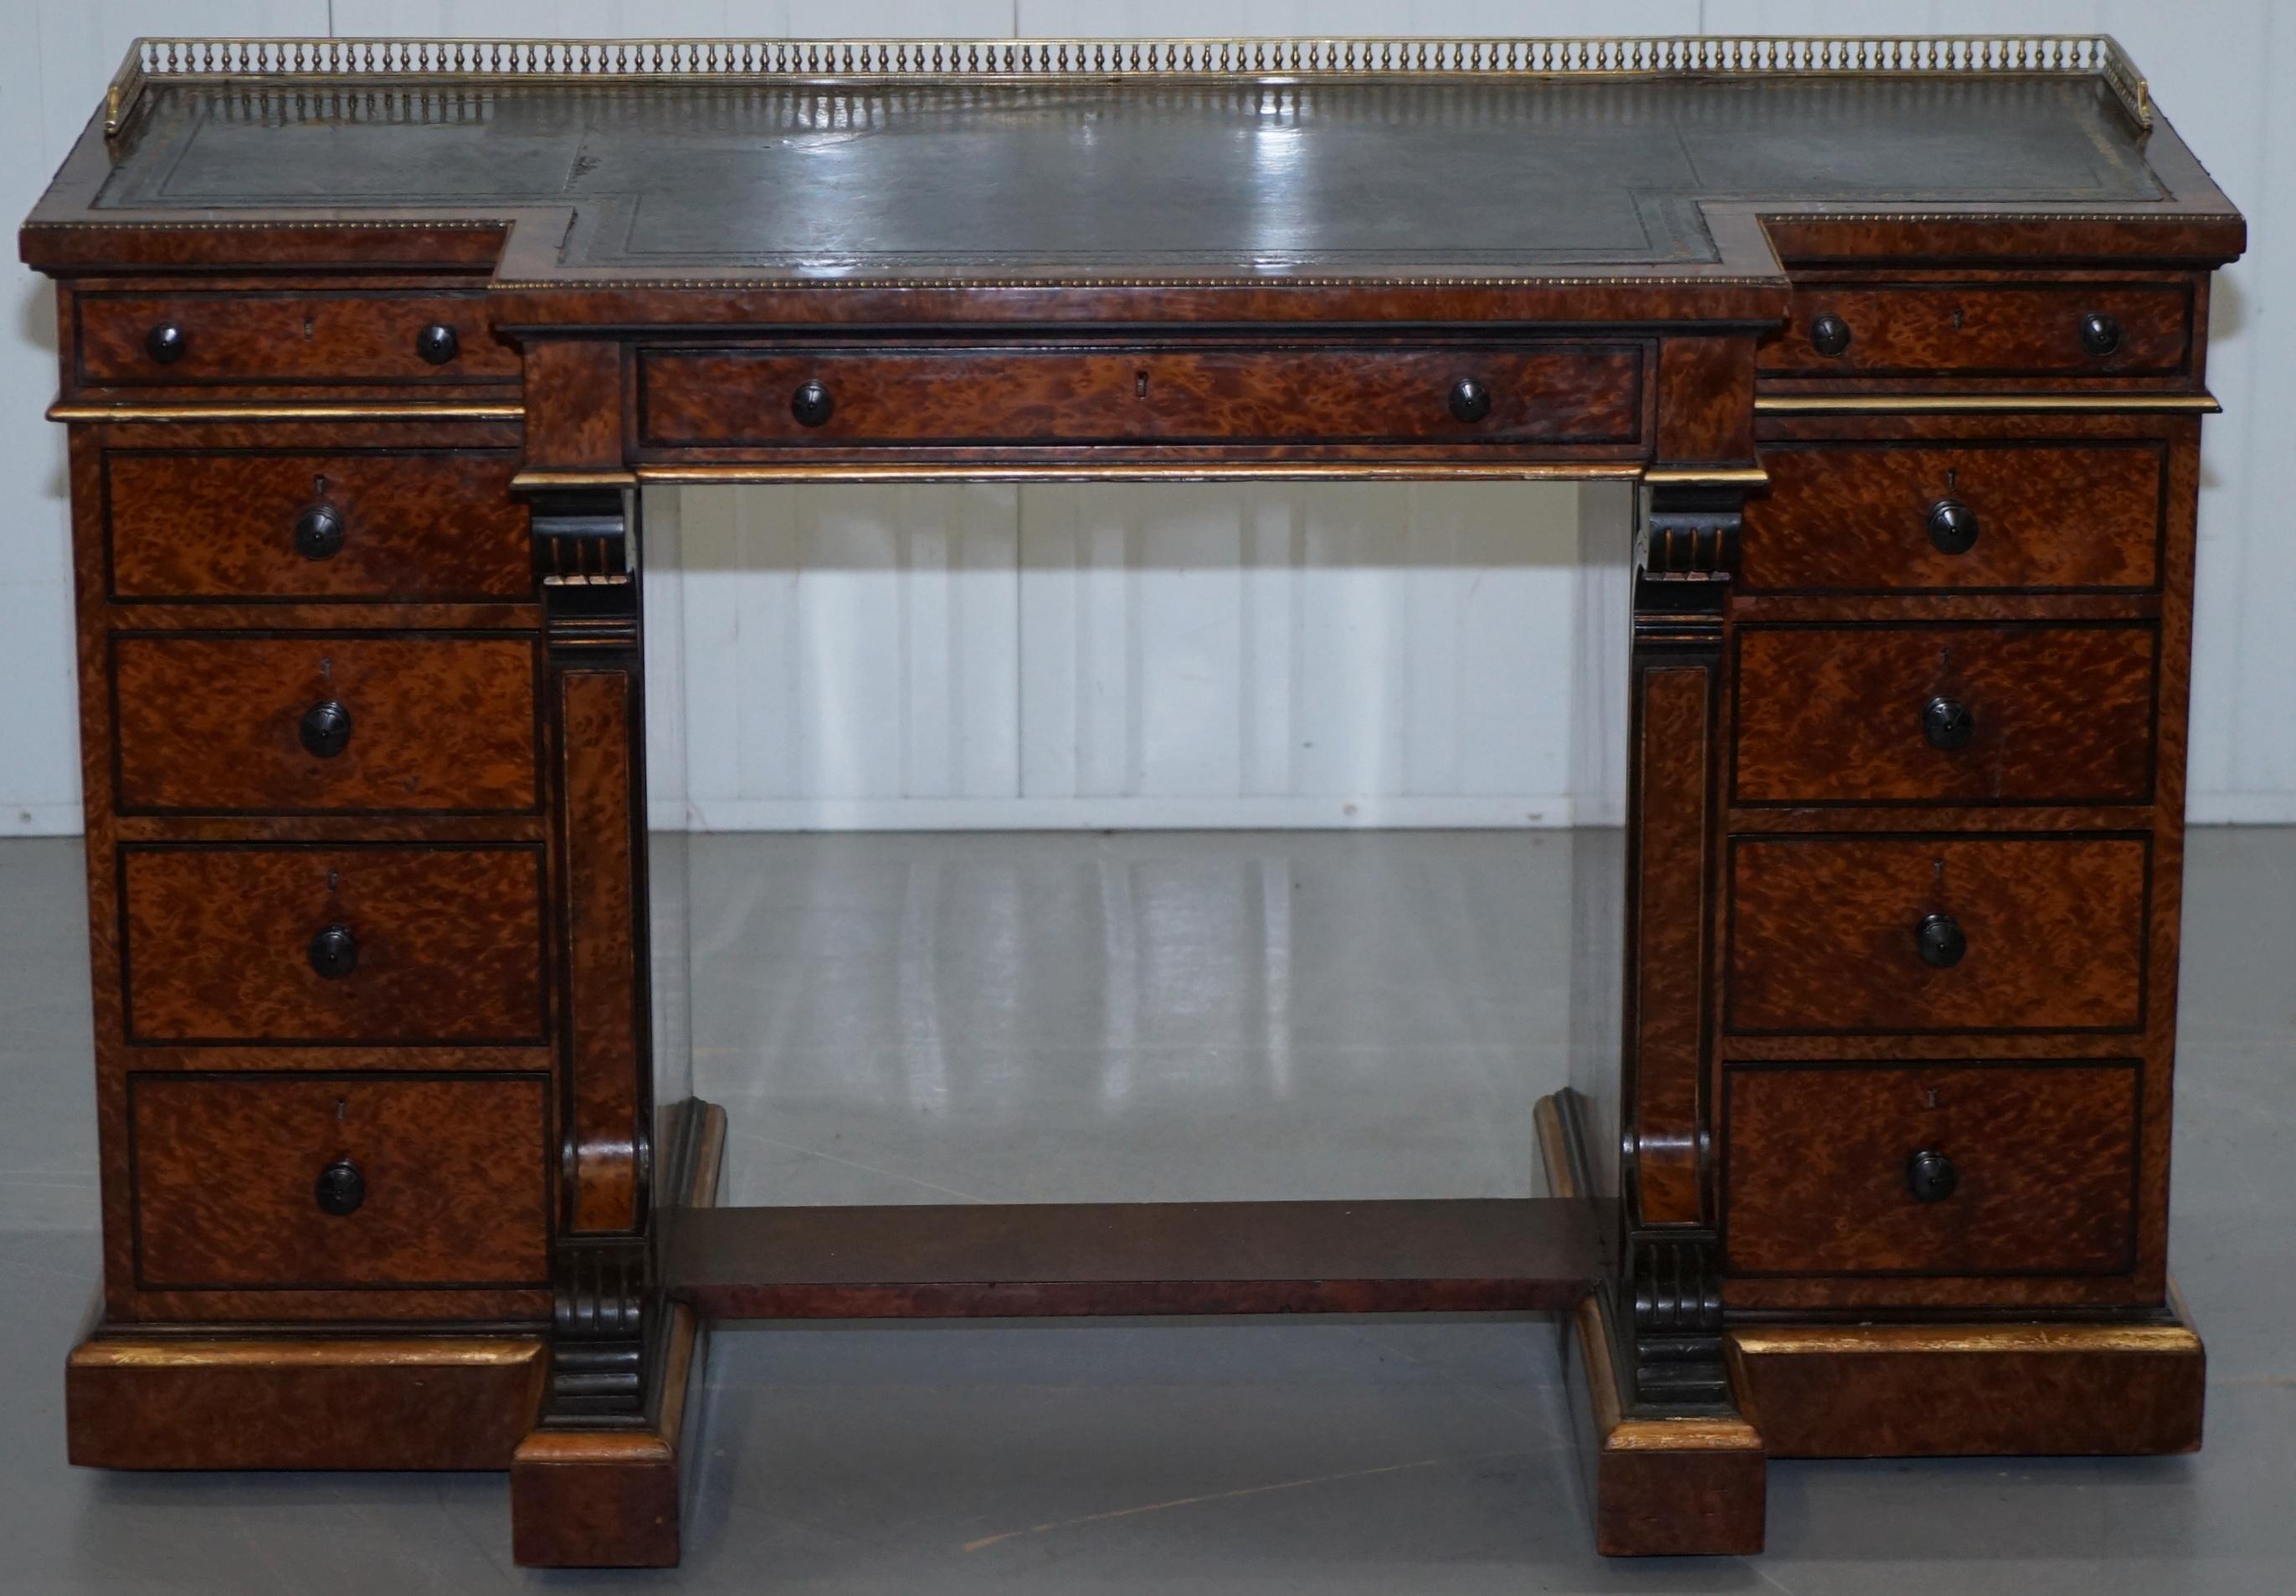 We are delighted to offer for sale this stunning and exceptionally rare Gillow Library breakfront desk with brass gallery in Burr Amboyna timber, circa 1852-1857

An exceptionally rare example of a high Victorian Library desk made by one of the